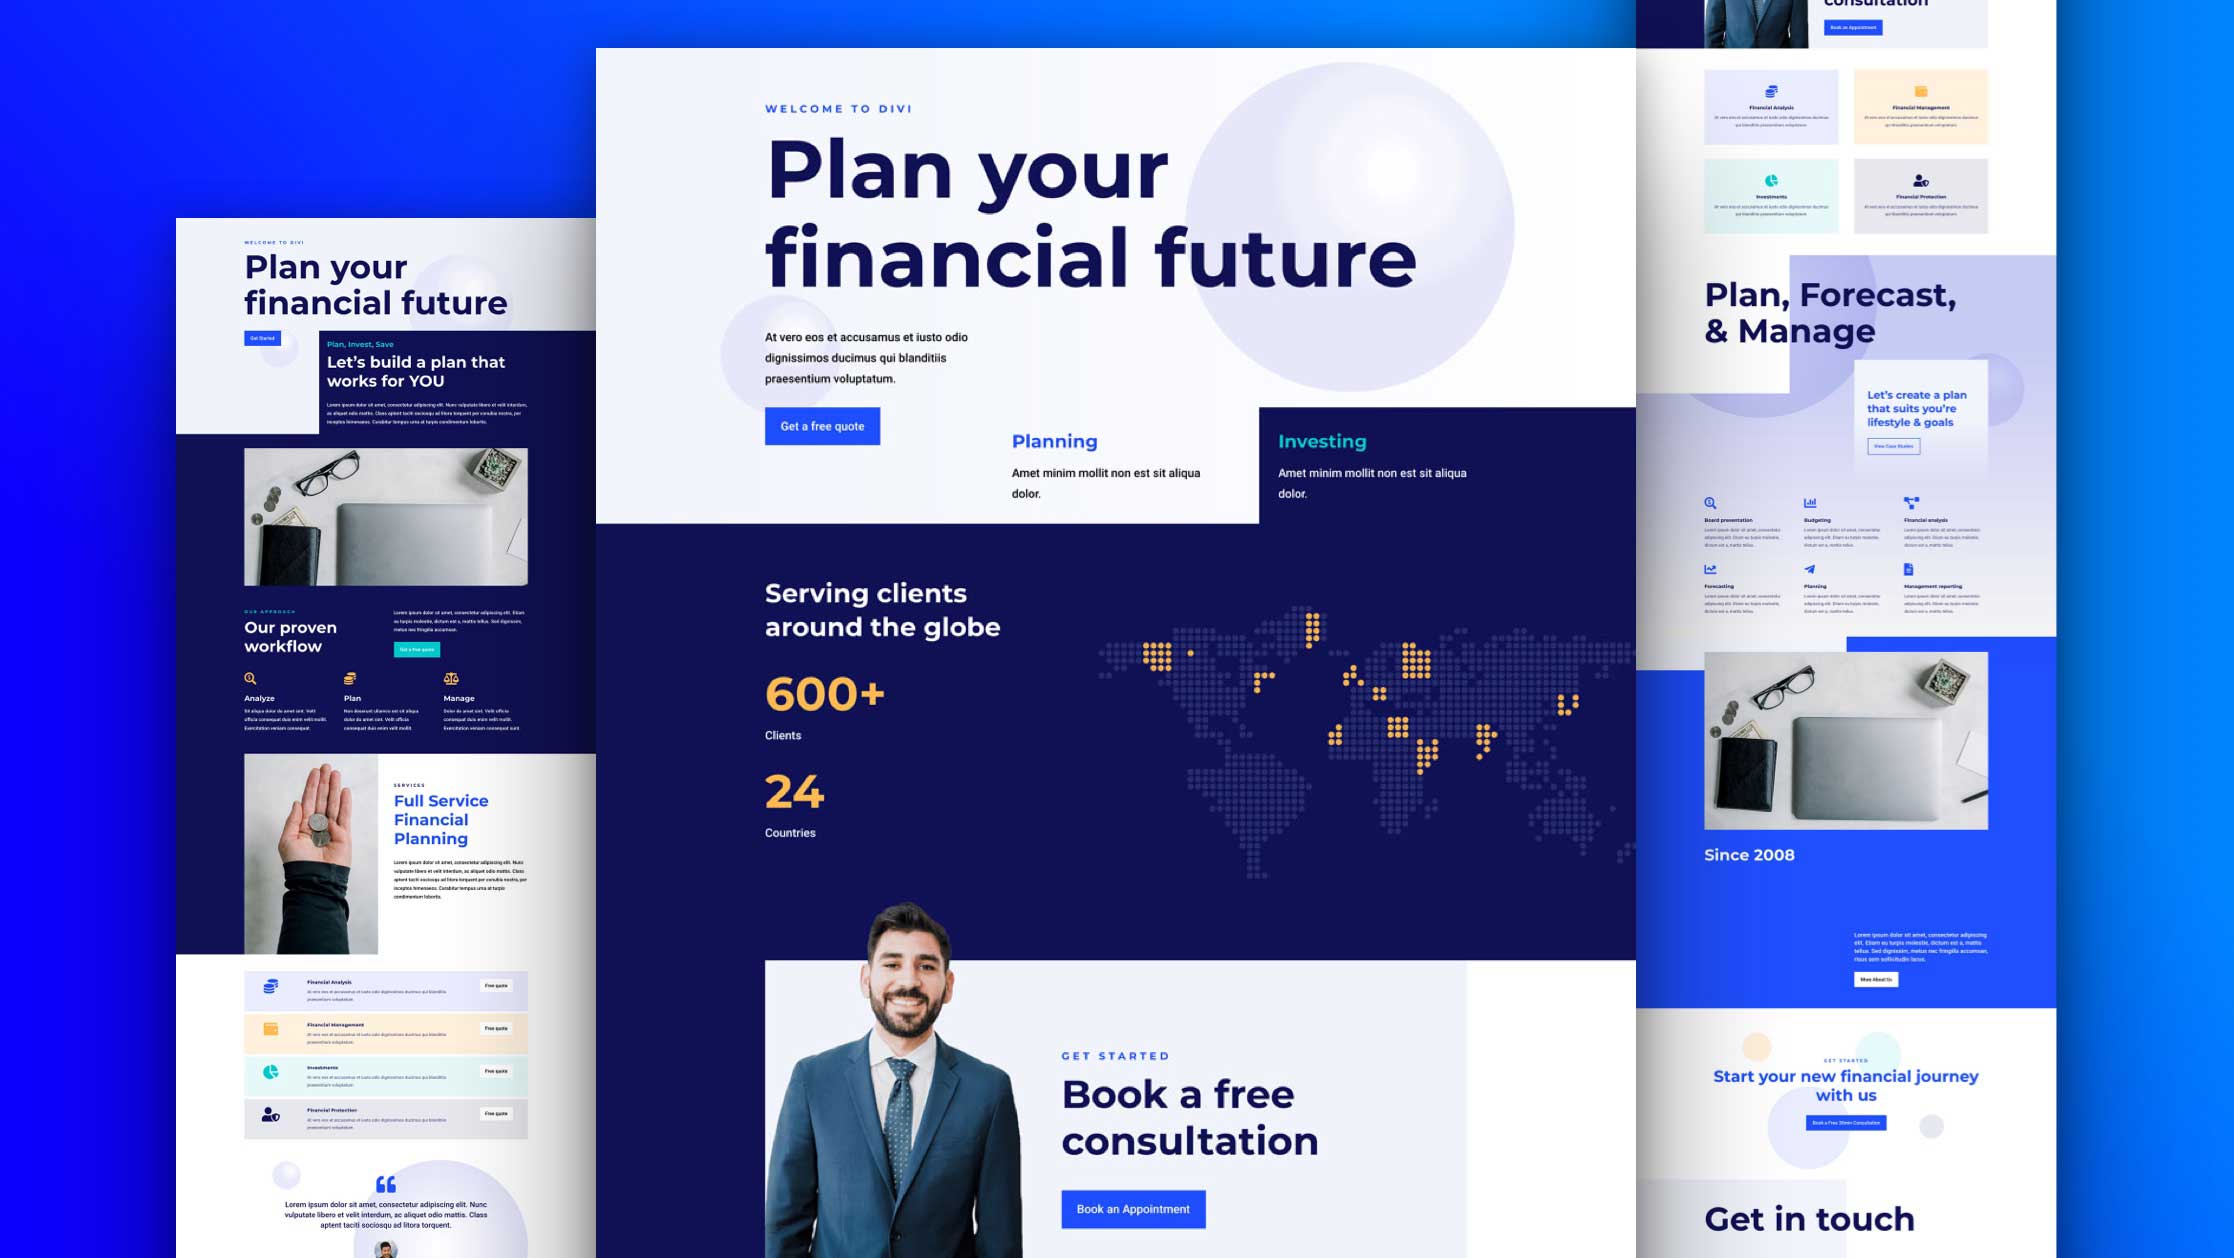 Get a FREE Financial Services Layout Pack for Divi